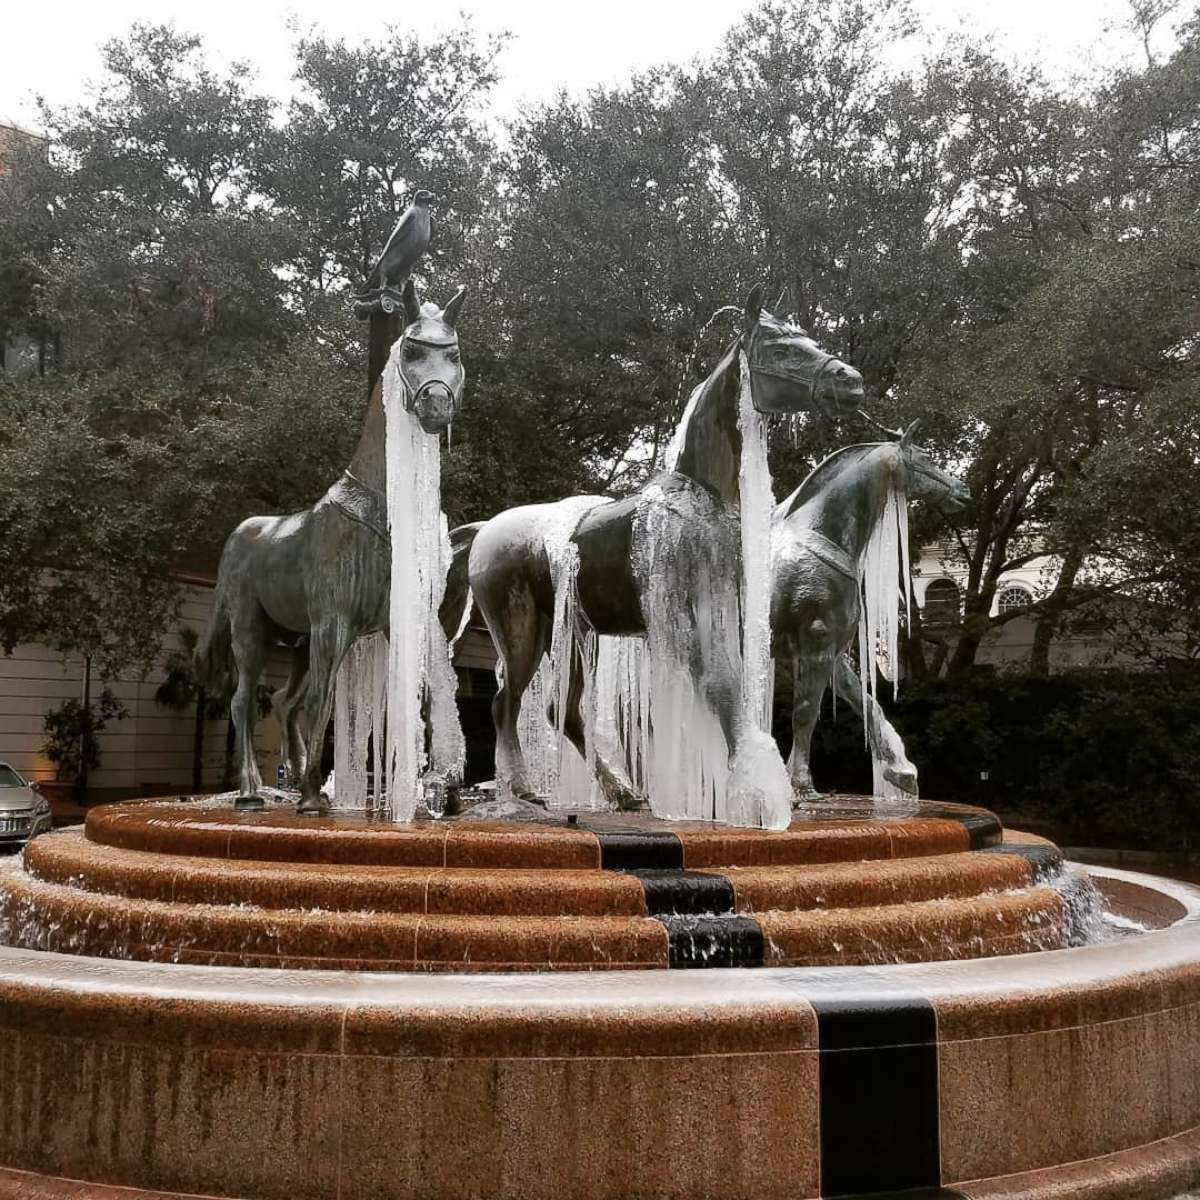 PHOTO: Ice drapes from the fountain at Belmond Charleston Place, Jan. 3, 2018, in Charleston, S.C.